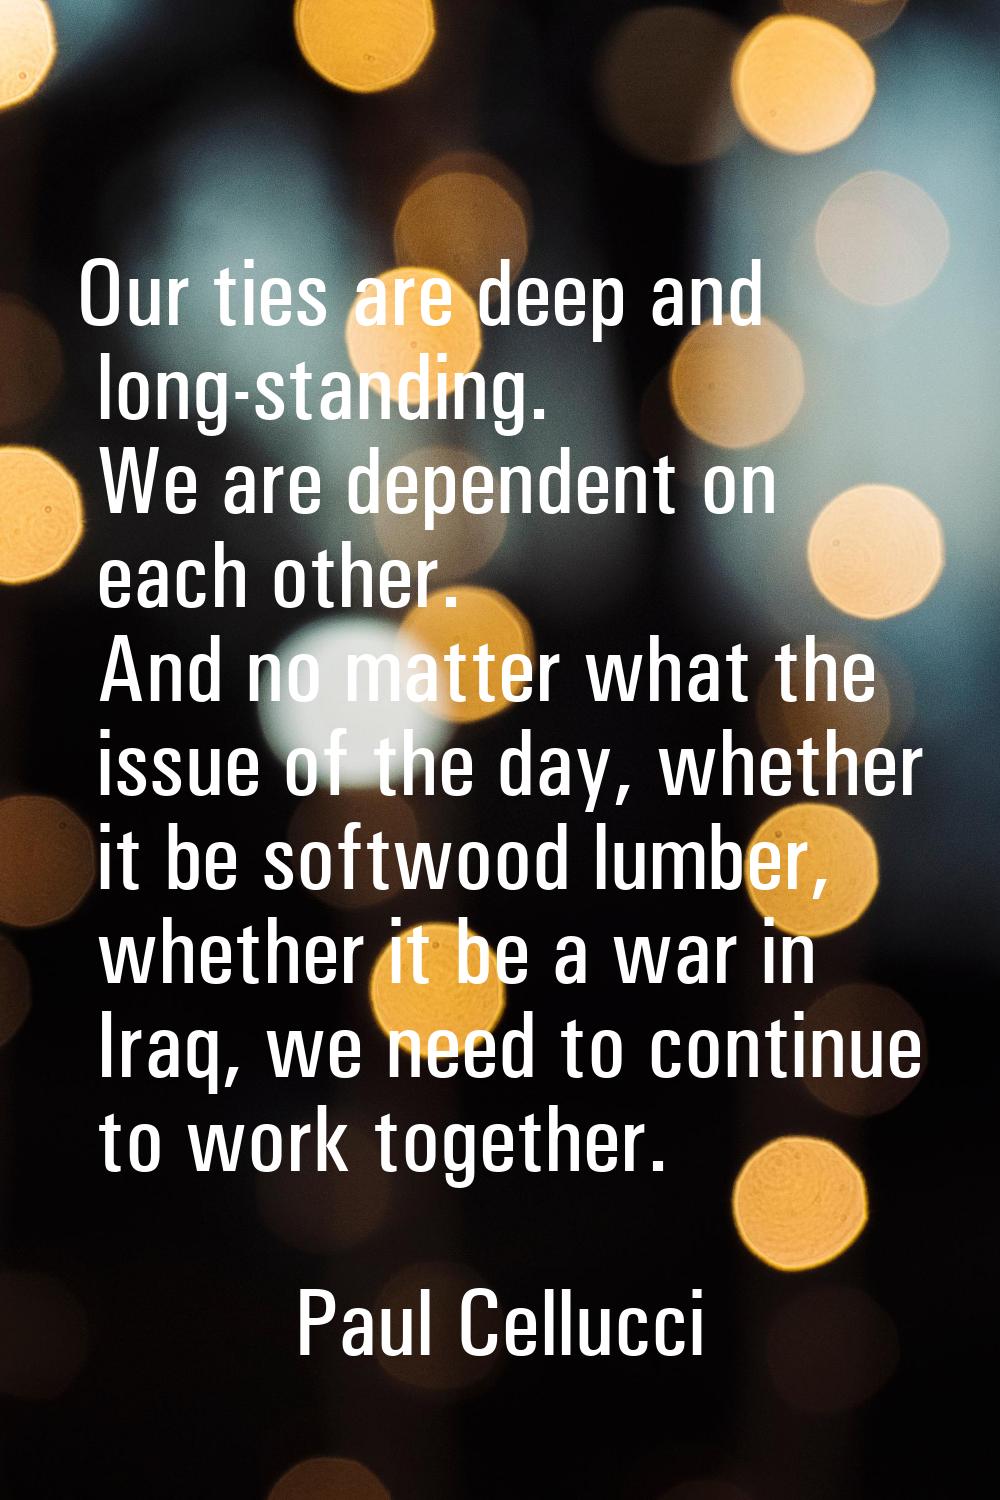 Our ties are deep and long-standing. We are dependent on each other. And no matter what the issue o